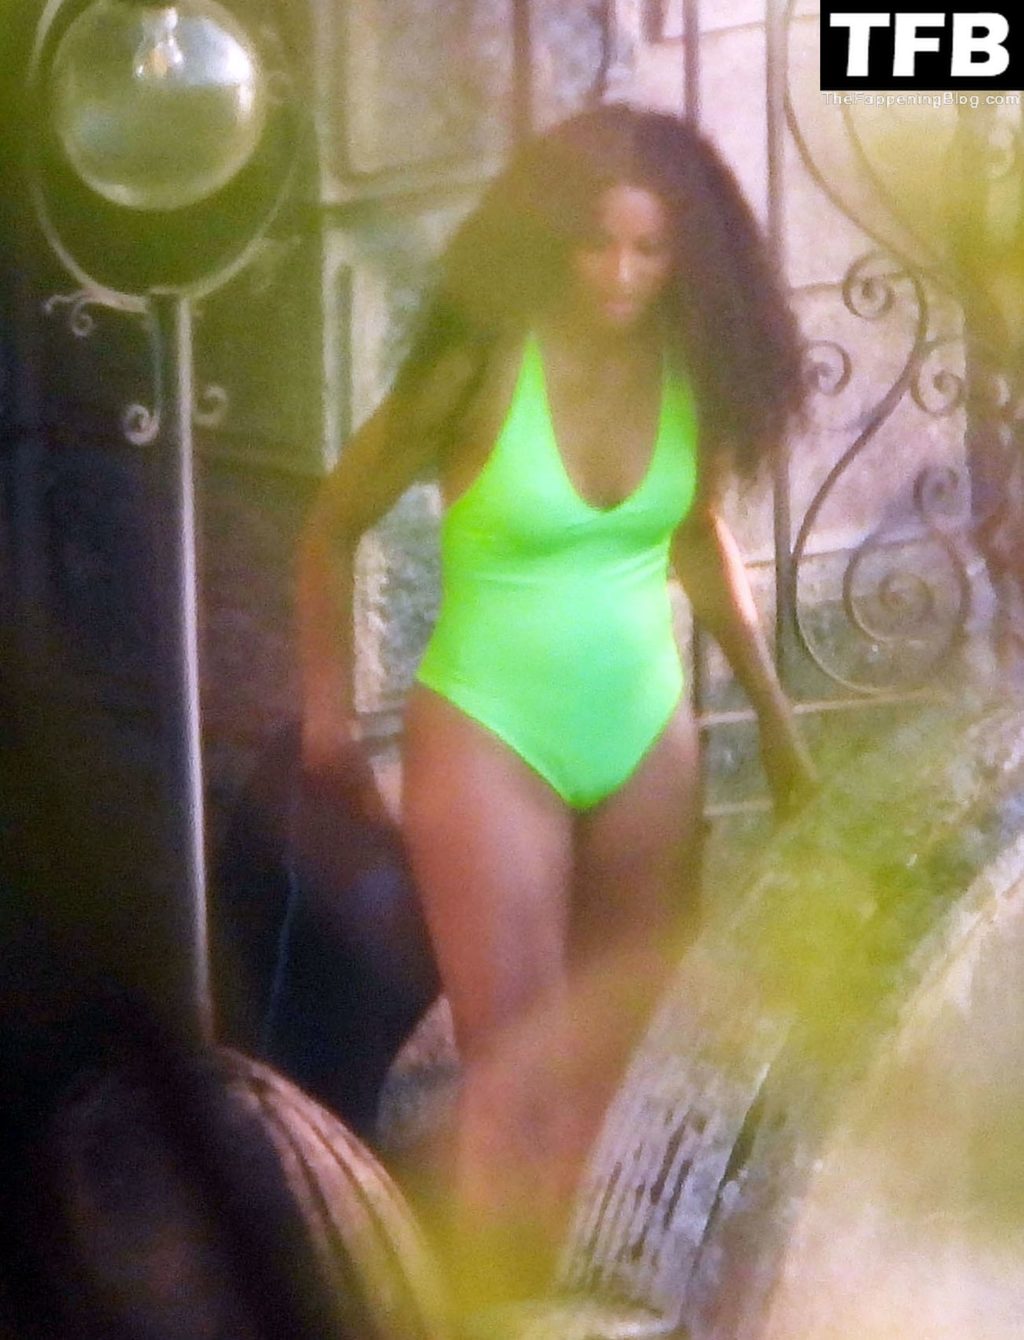 Ciara Looks Hot in Her Lime Green Swimsuit (65 Photos)